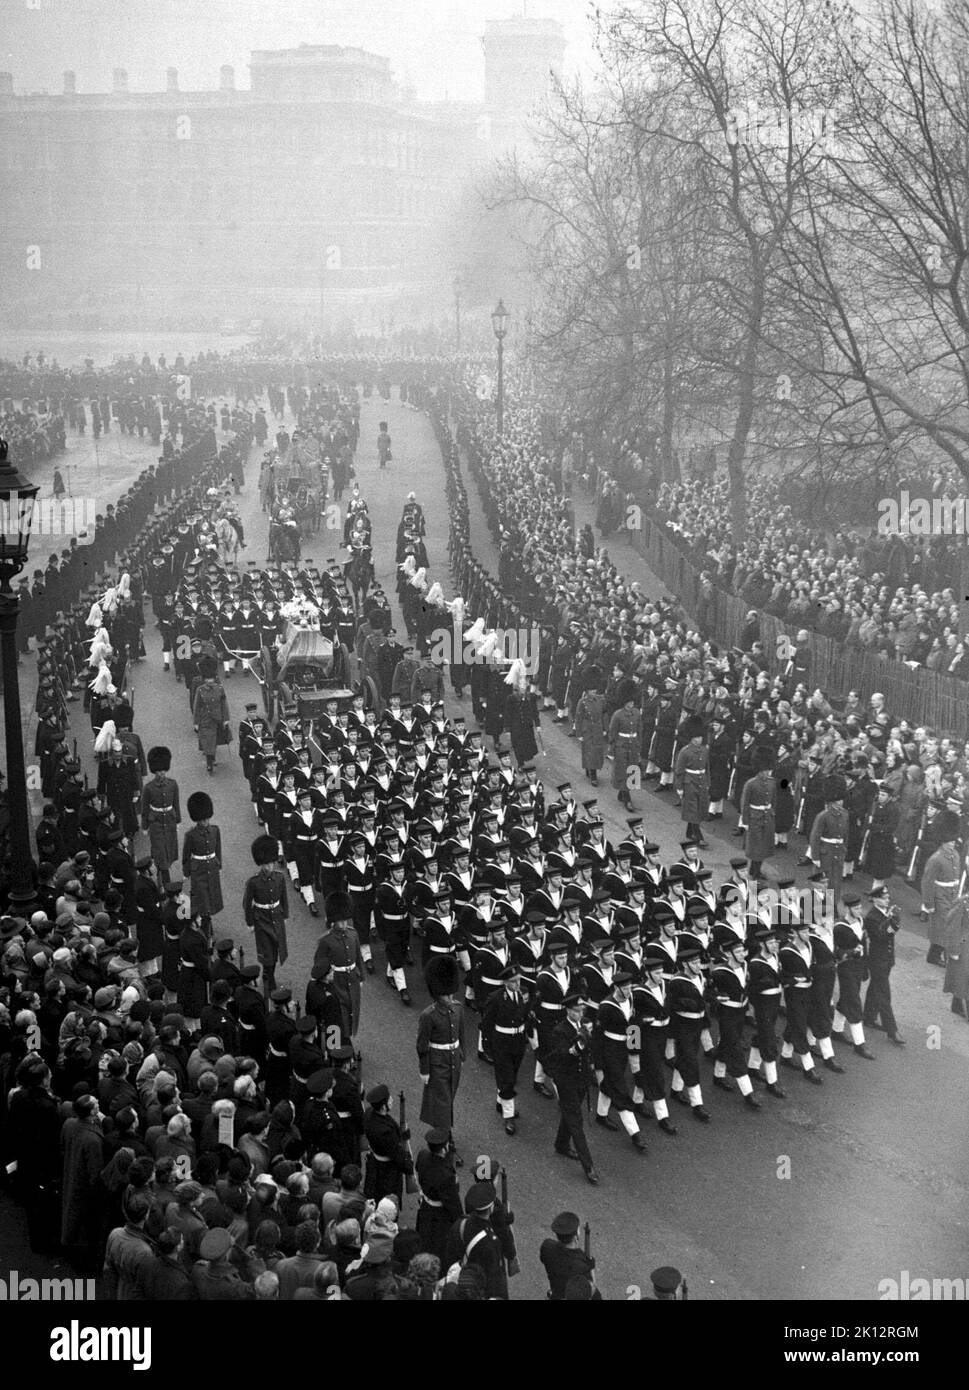 File photo dated 15/2/1952 of the funeral cortege of King George VI moving from Horse Guards Parade into the Mall on the way to Paddington Station borne on a gun carriage. Non-commissioned sailors, Naval ratings, traditionally pull the gun carriage bearing the sovereign's coffin through the streets using ropes, a practice which will take place during the Queen's funeral. The custom was adopted in 1901 at Victoria's funeral when the splinter bar of the gun carriage broke as her coffin, weighing nearly half a ton, was lifted into place and the horses began to move. The naval guard of honour step Stock Photo